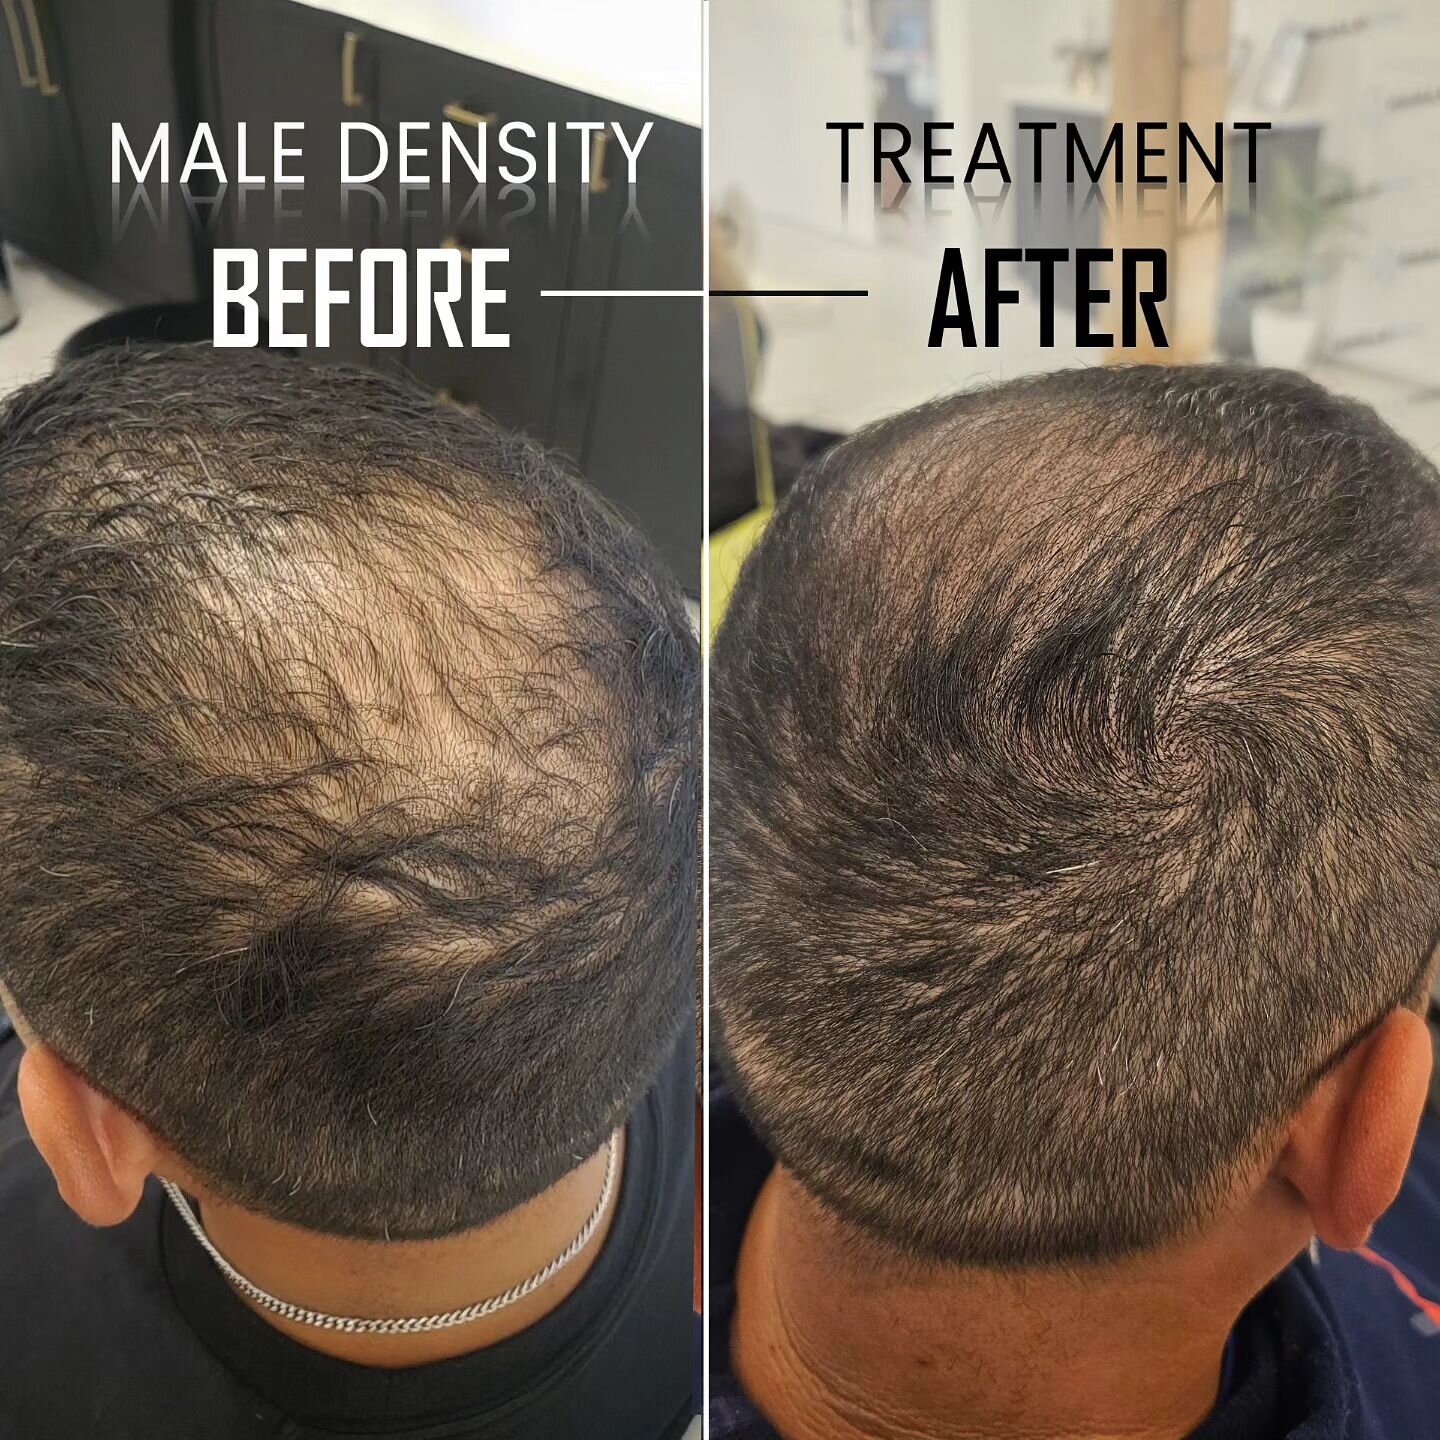 💥Another density treatment💥 Taking off that edge and lightness in the scalp, making the thinning area much less noticeable 💯

#smp #density #densitysmp #hairtattoo #scalptattoo #hairtransformation #hairlosstreatment #tattoo #midwesttattoo #midwest